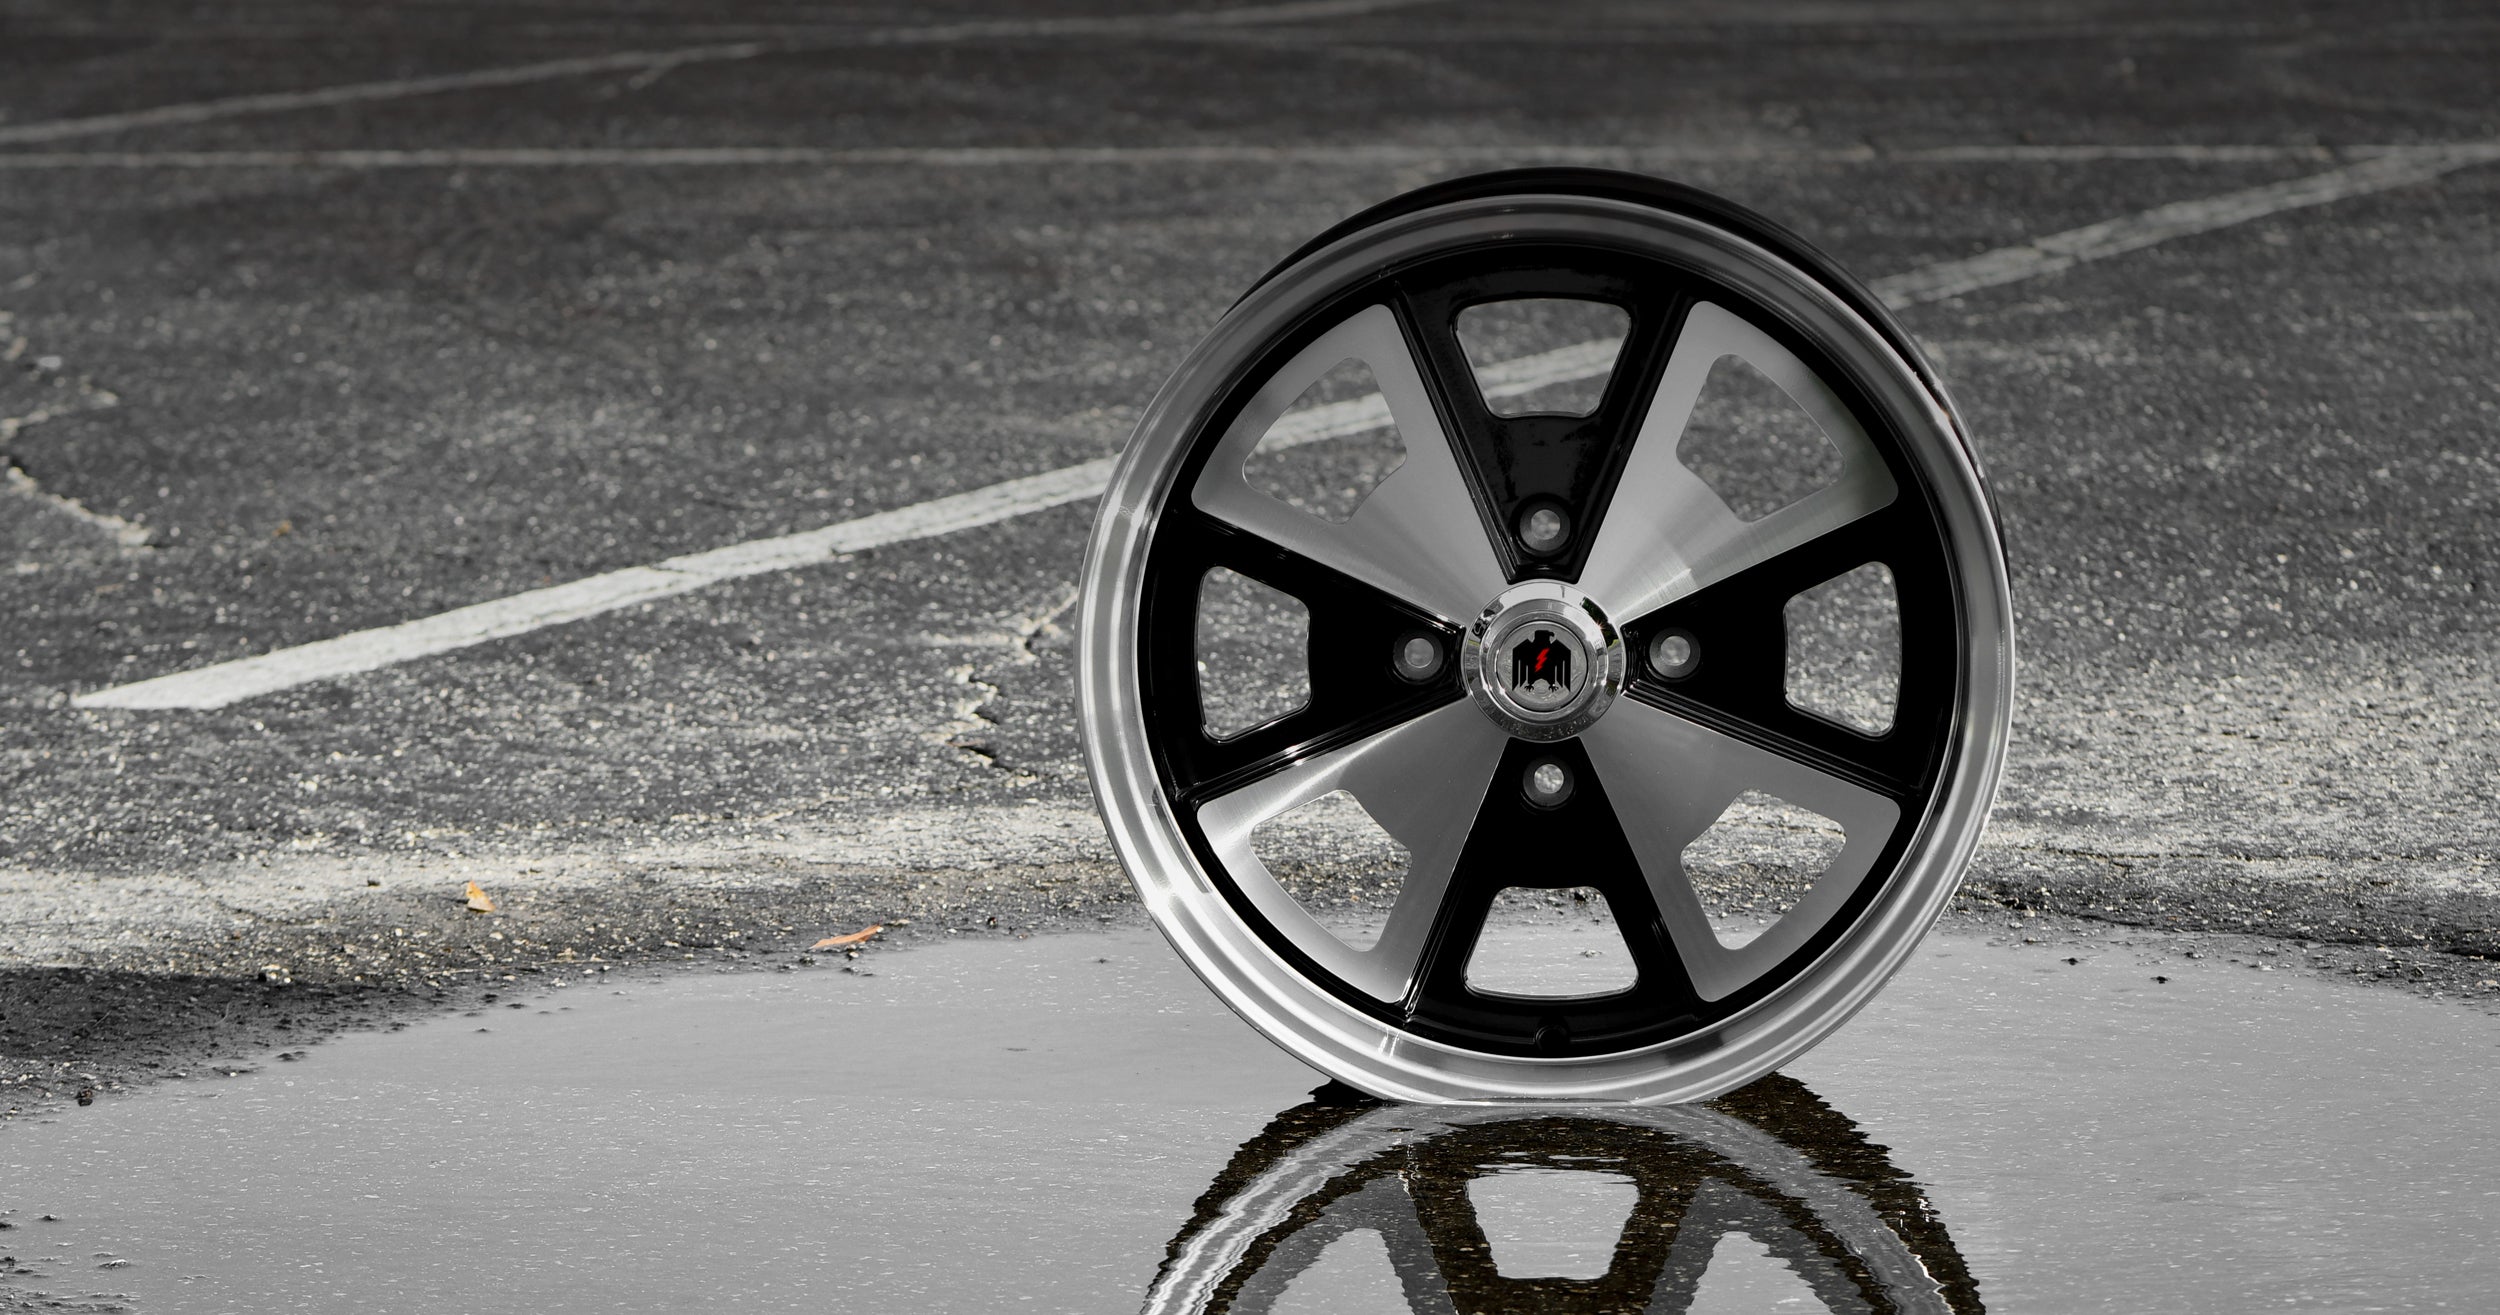 Klassik Rader Wheels 914 Gloss Black Machined Face & Lip on puddle with concrete